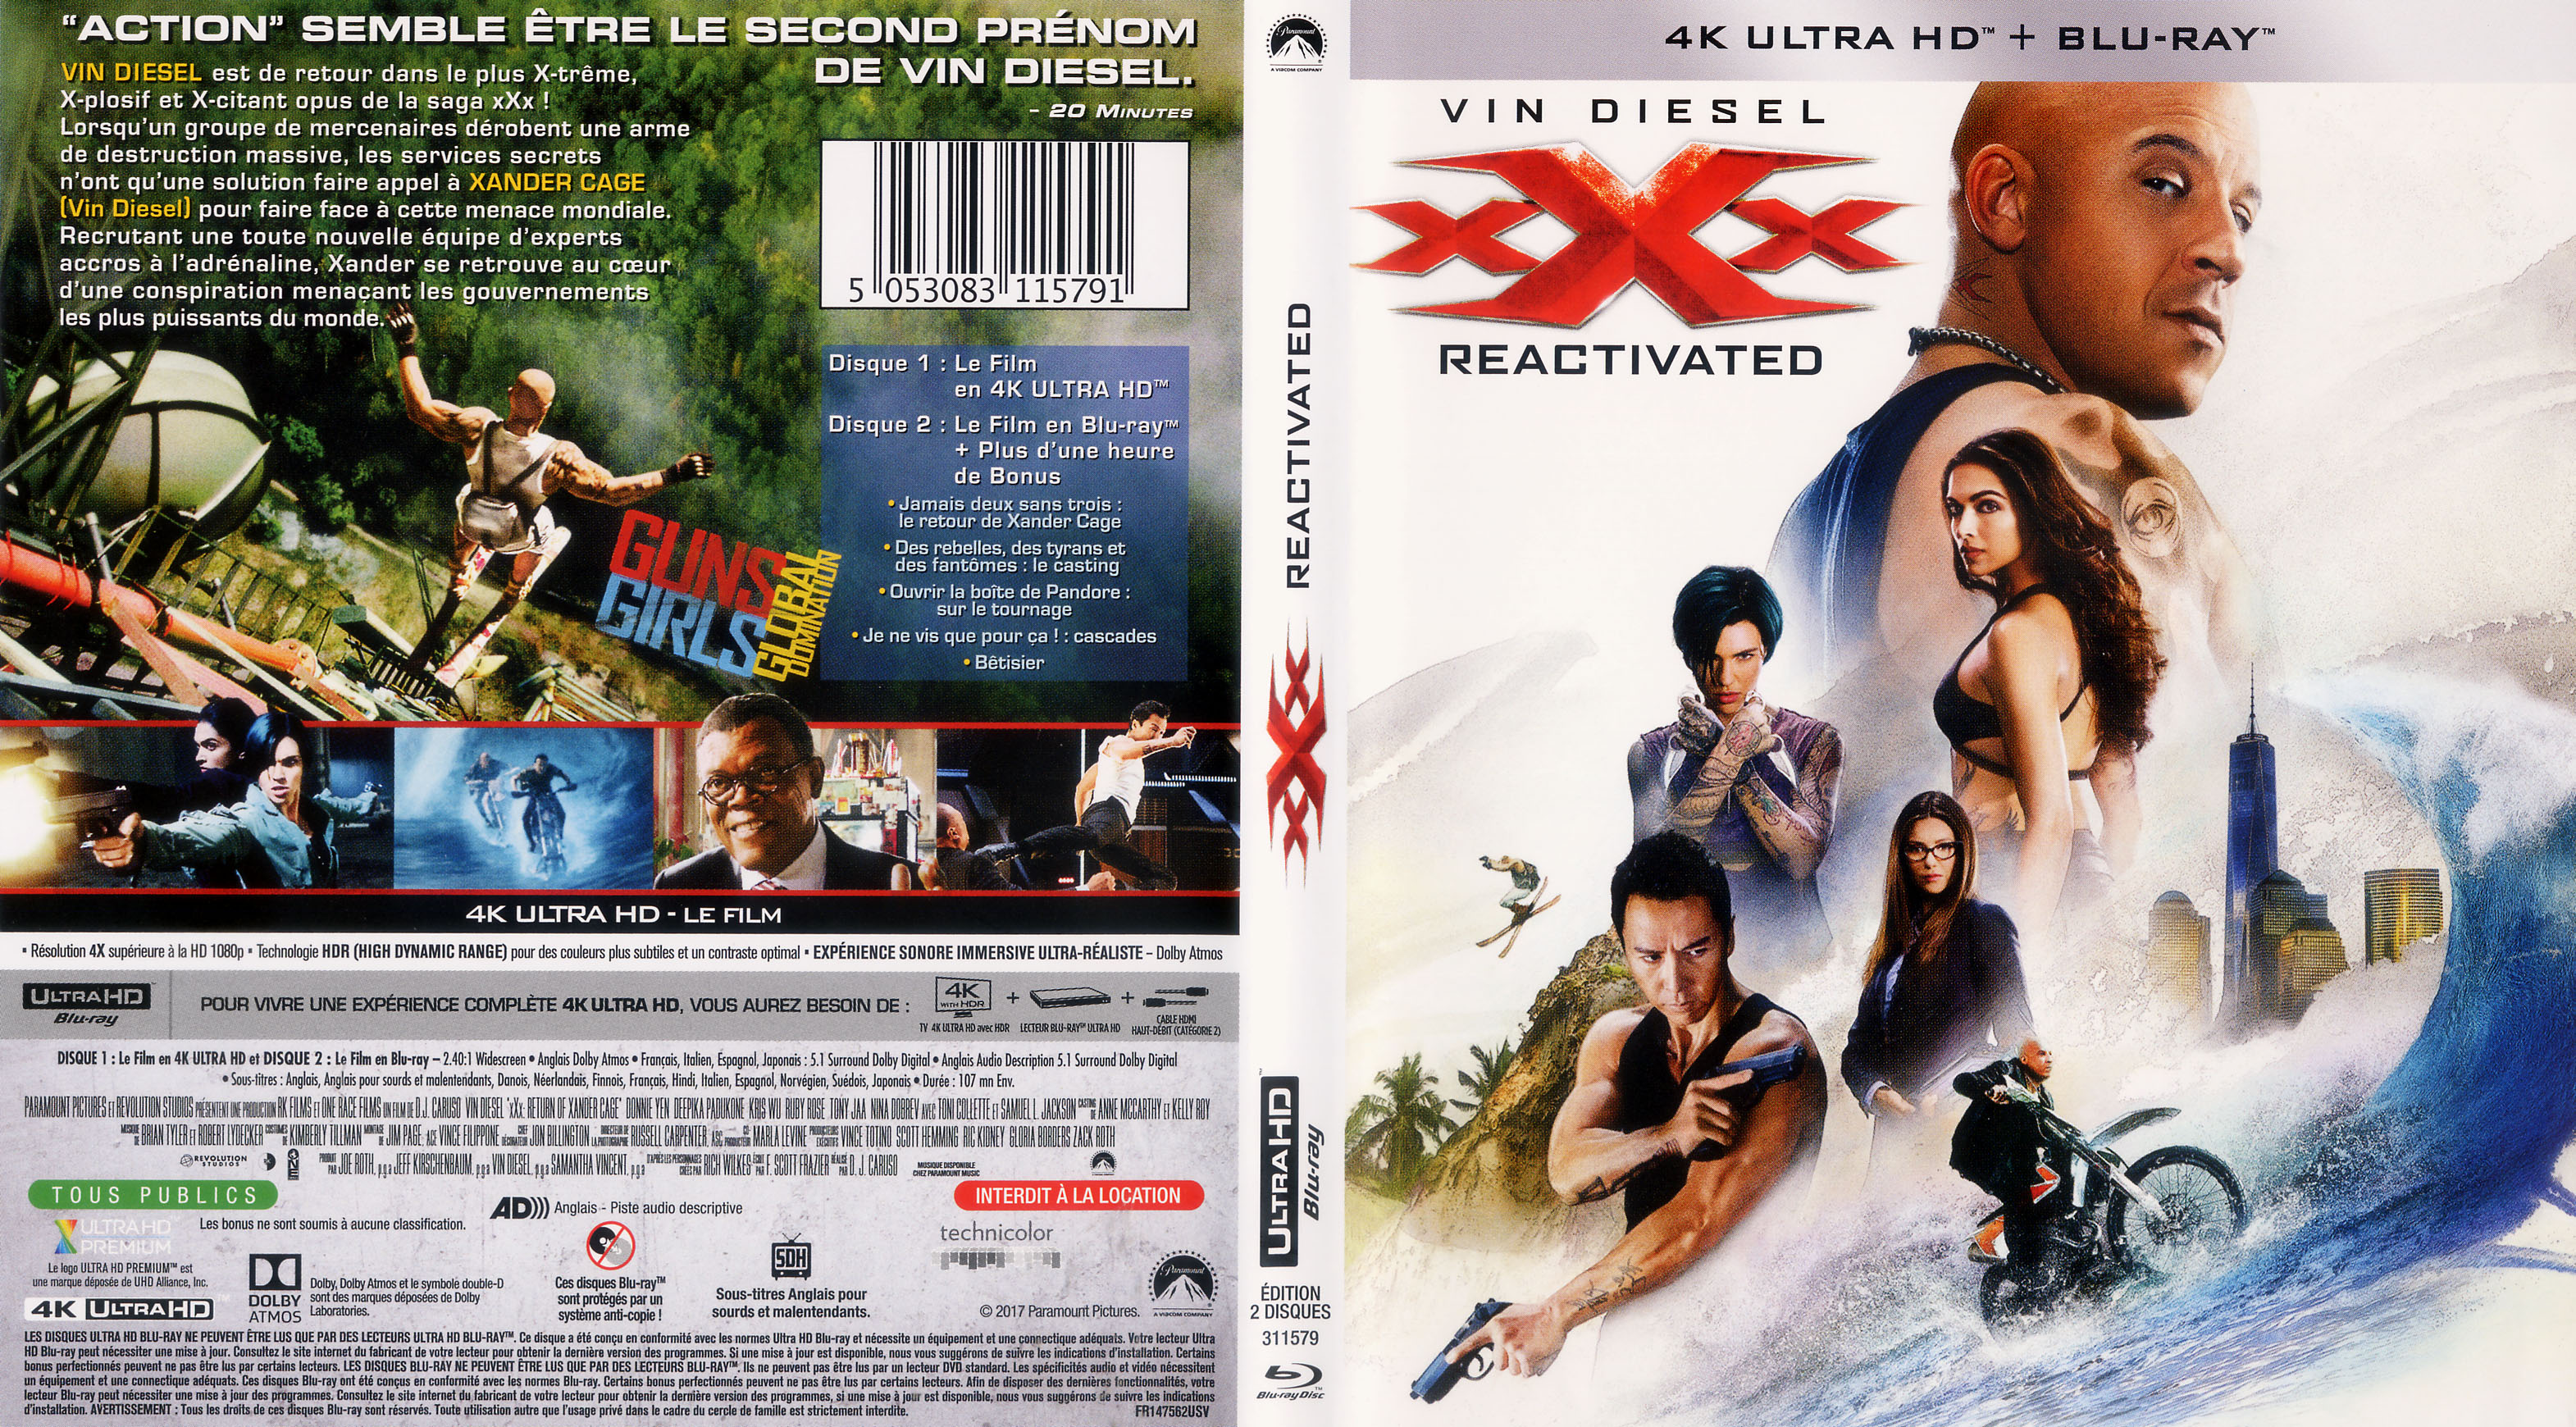 Jaquette DVD XXX reactivated 4K (BLU-RAY)